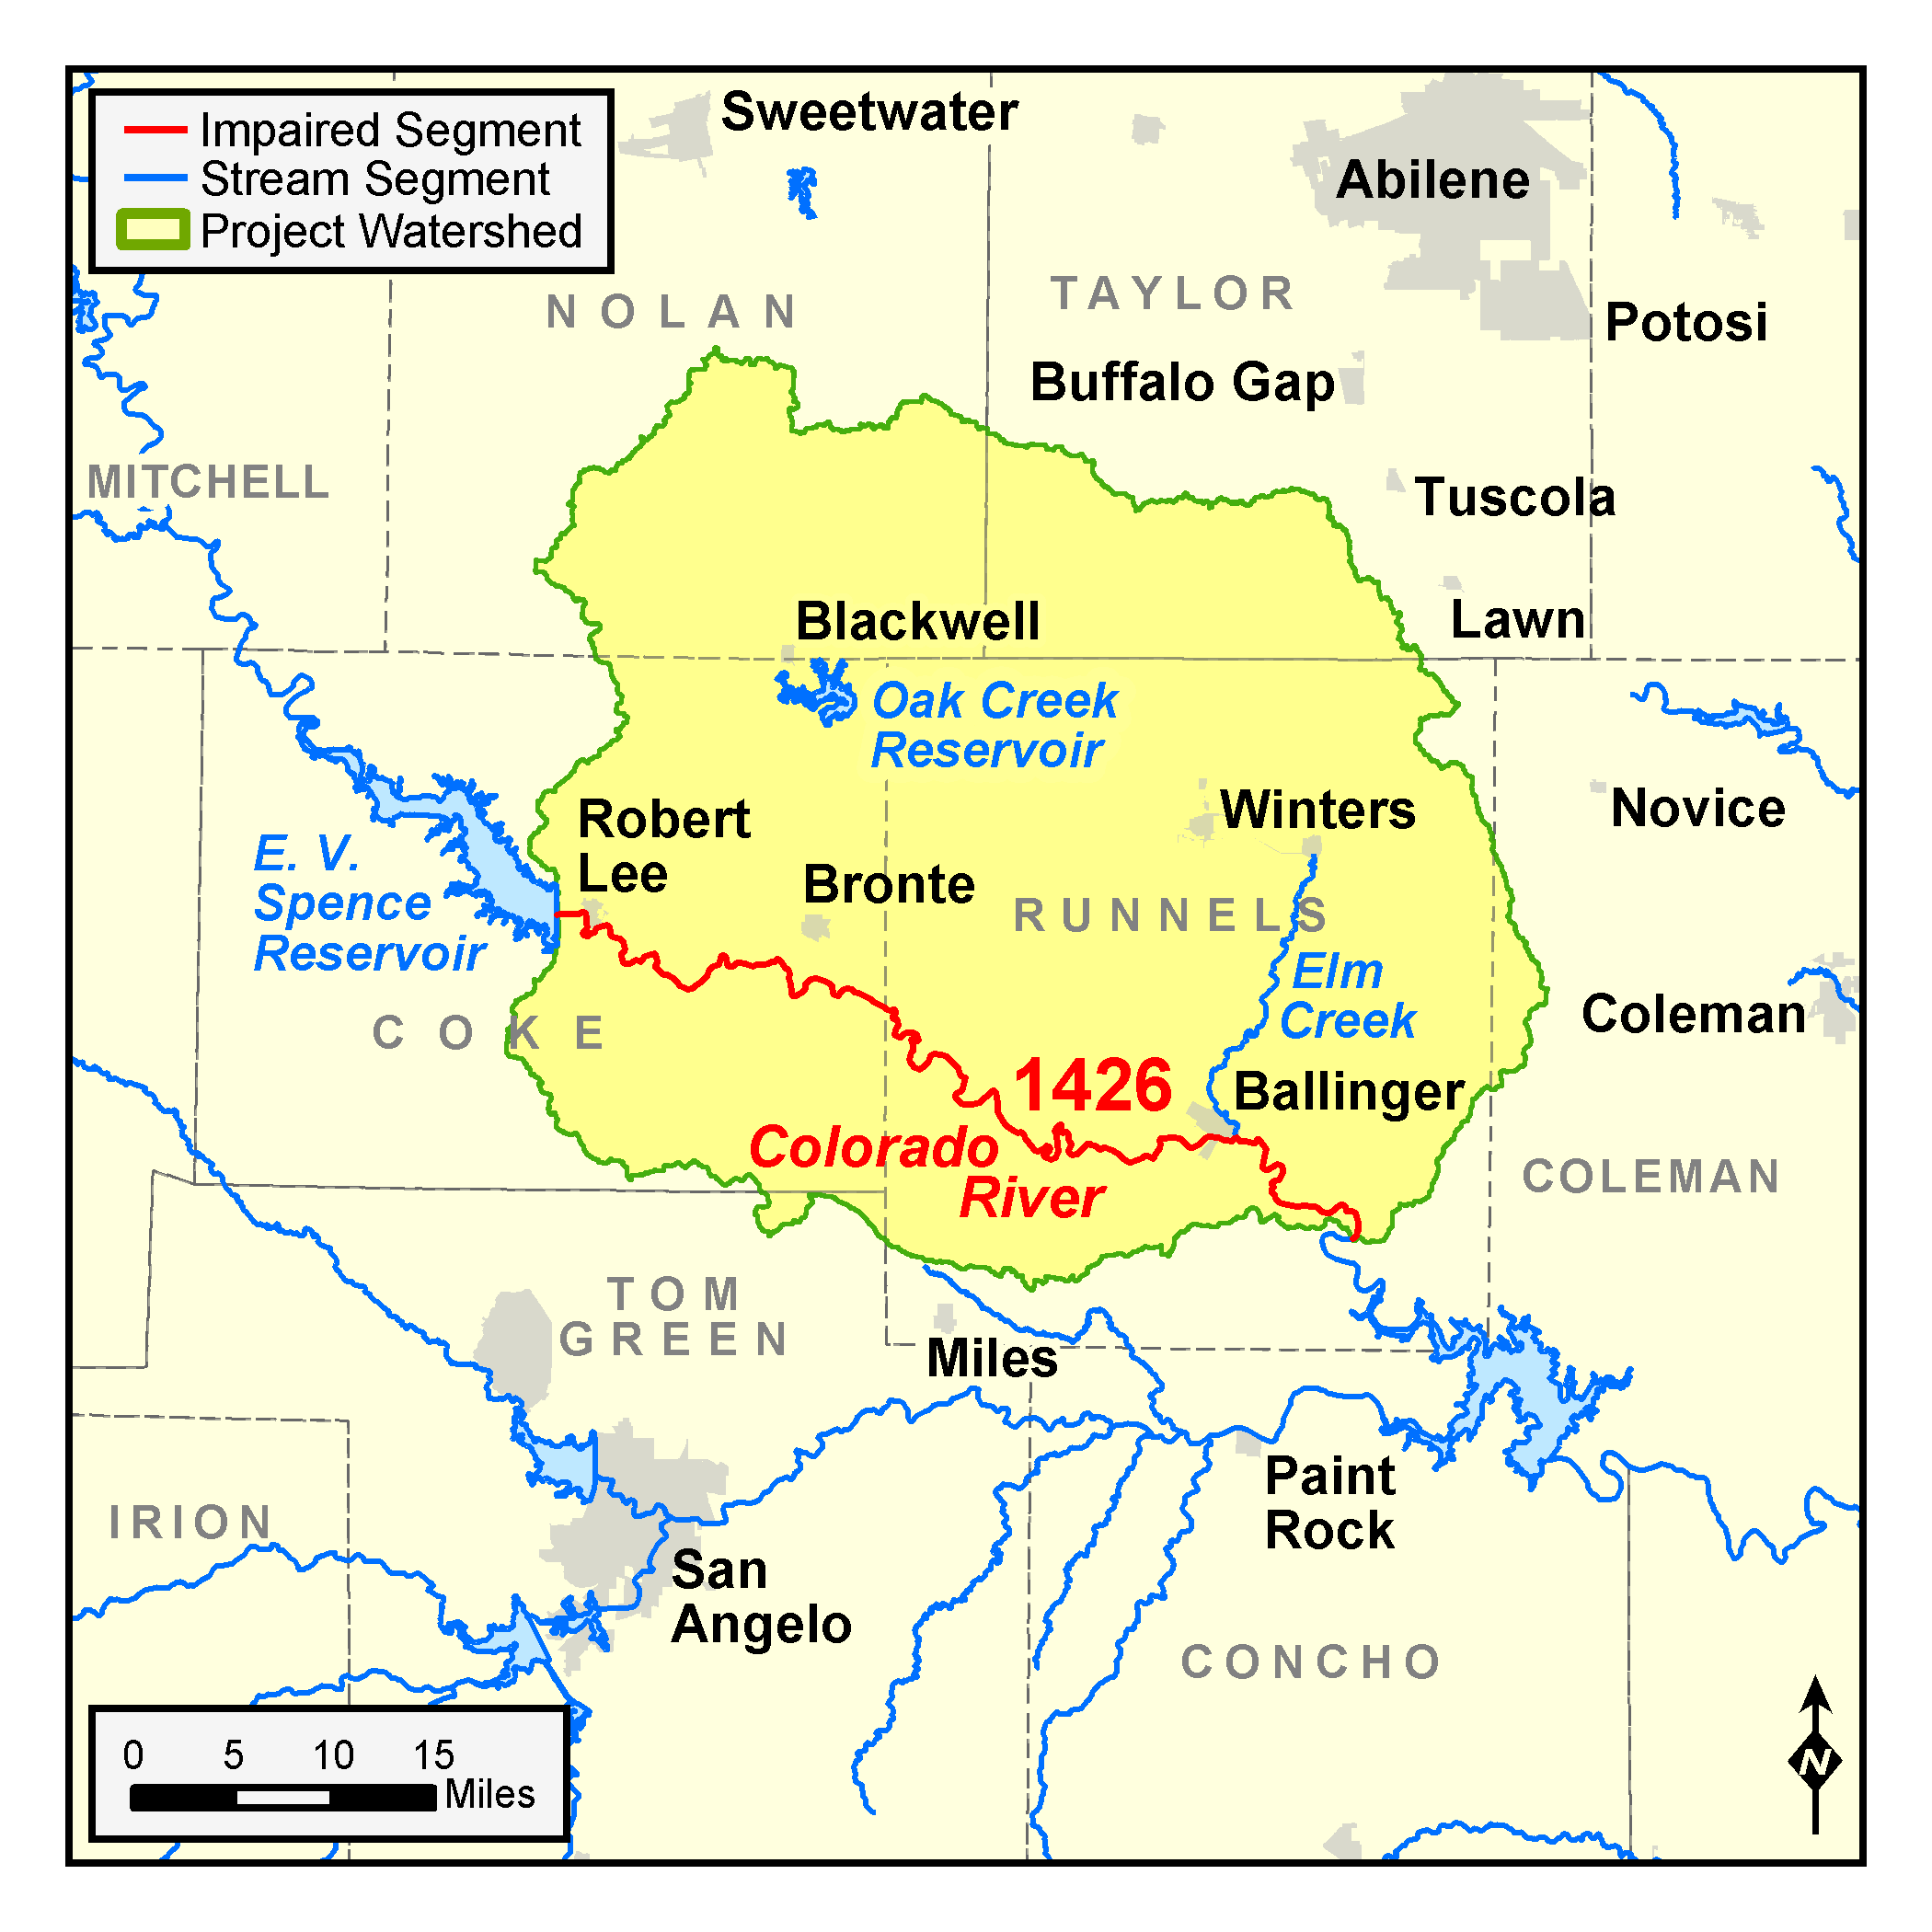 map of the Colorado River Below E.V. Spence Reservoir TMDL watershed